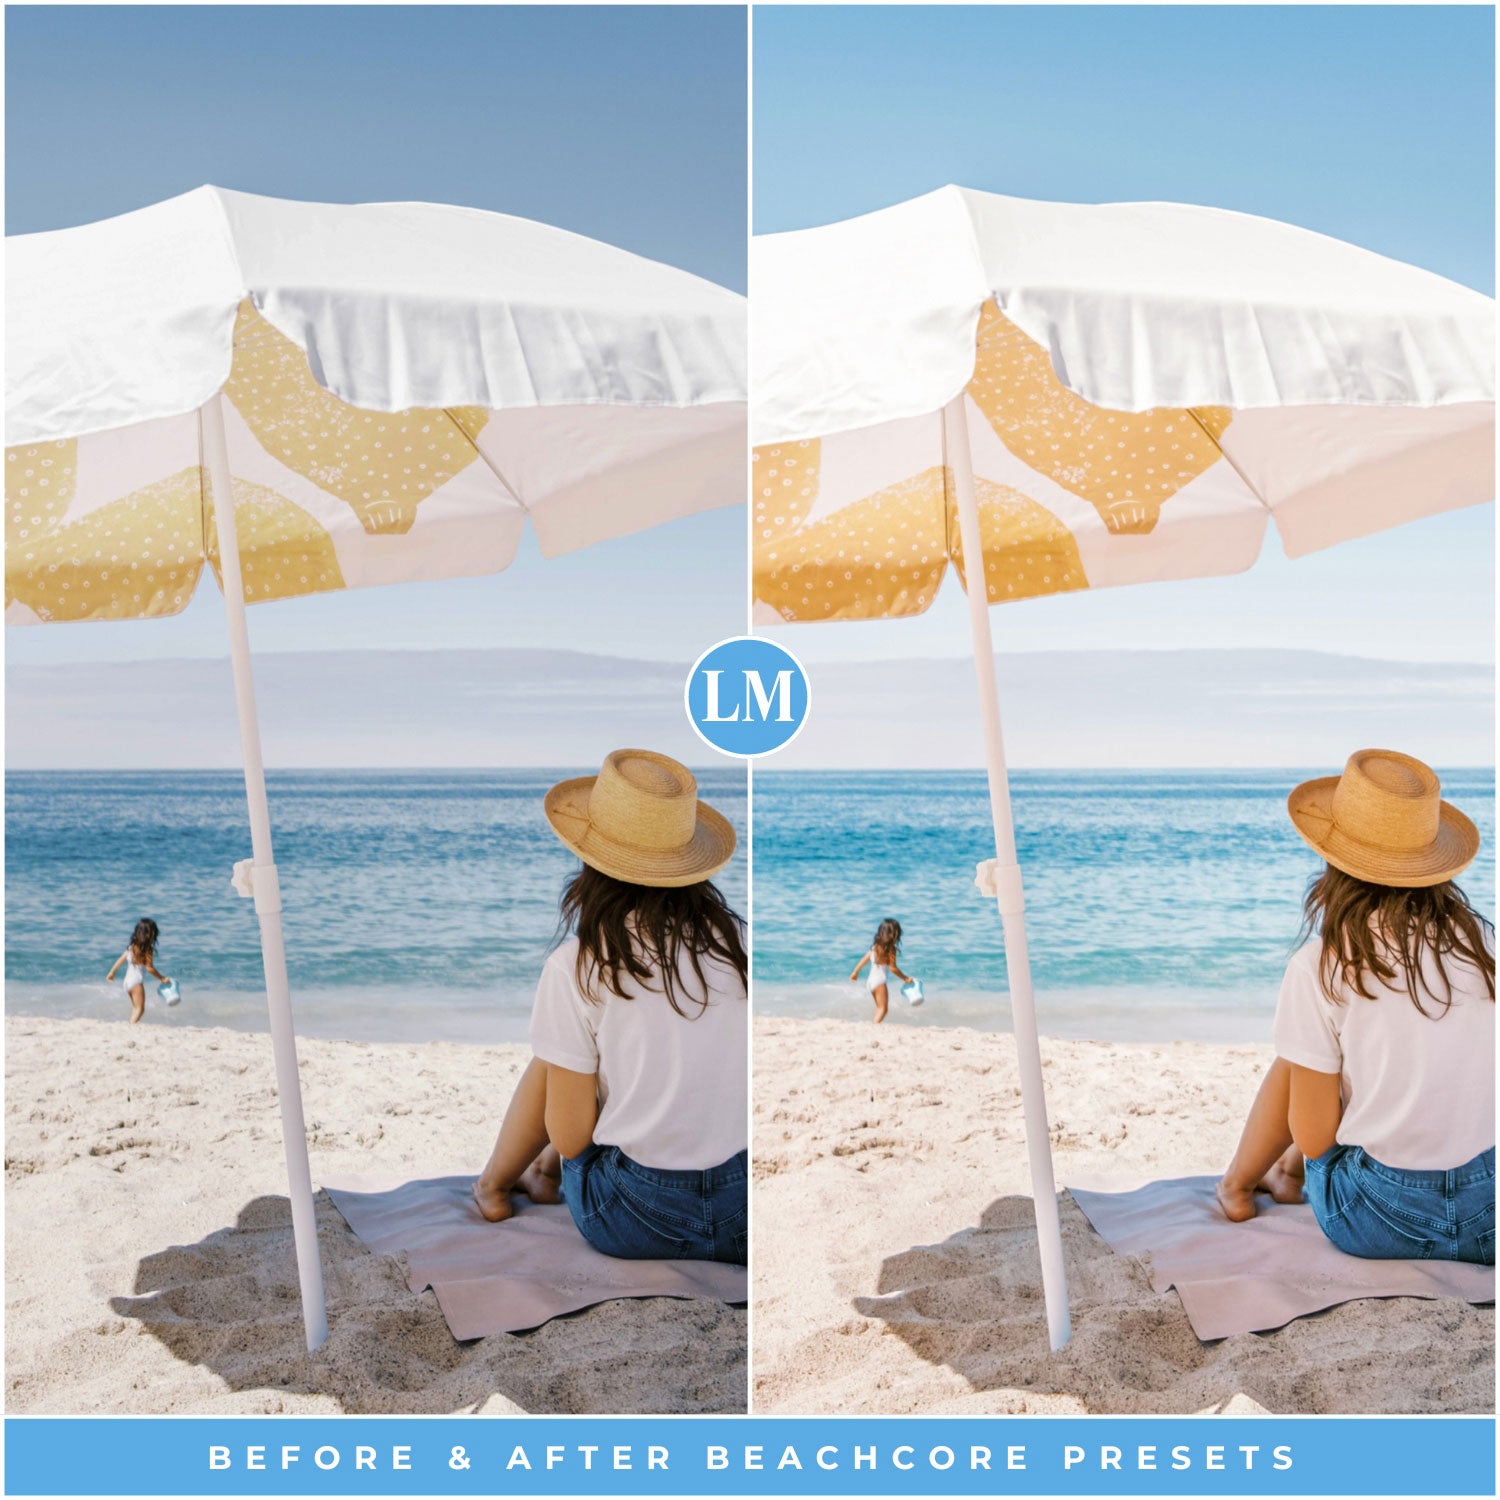 Vacation Beachcore Beach Lightroom Presets The Best Photo Editing Preset Filters For Lightroom Mobile And Desktop For Photographers and Instagram Influencers By Lou And Marks Presets